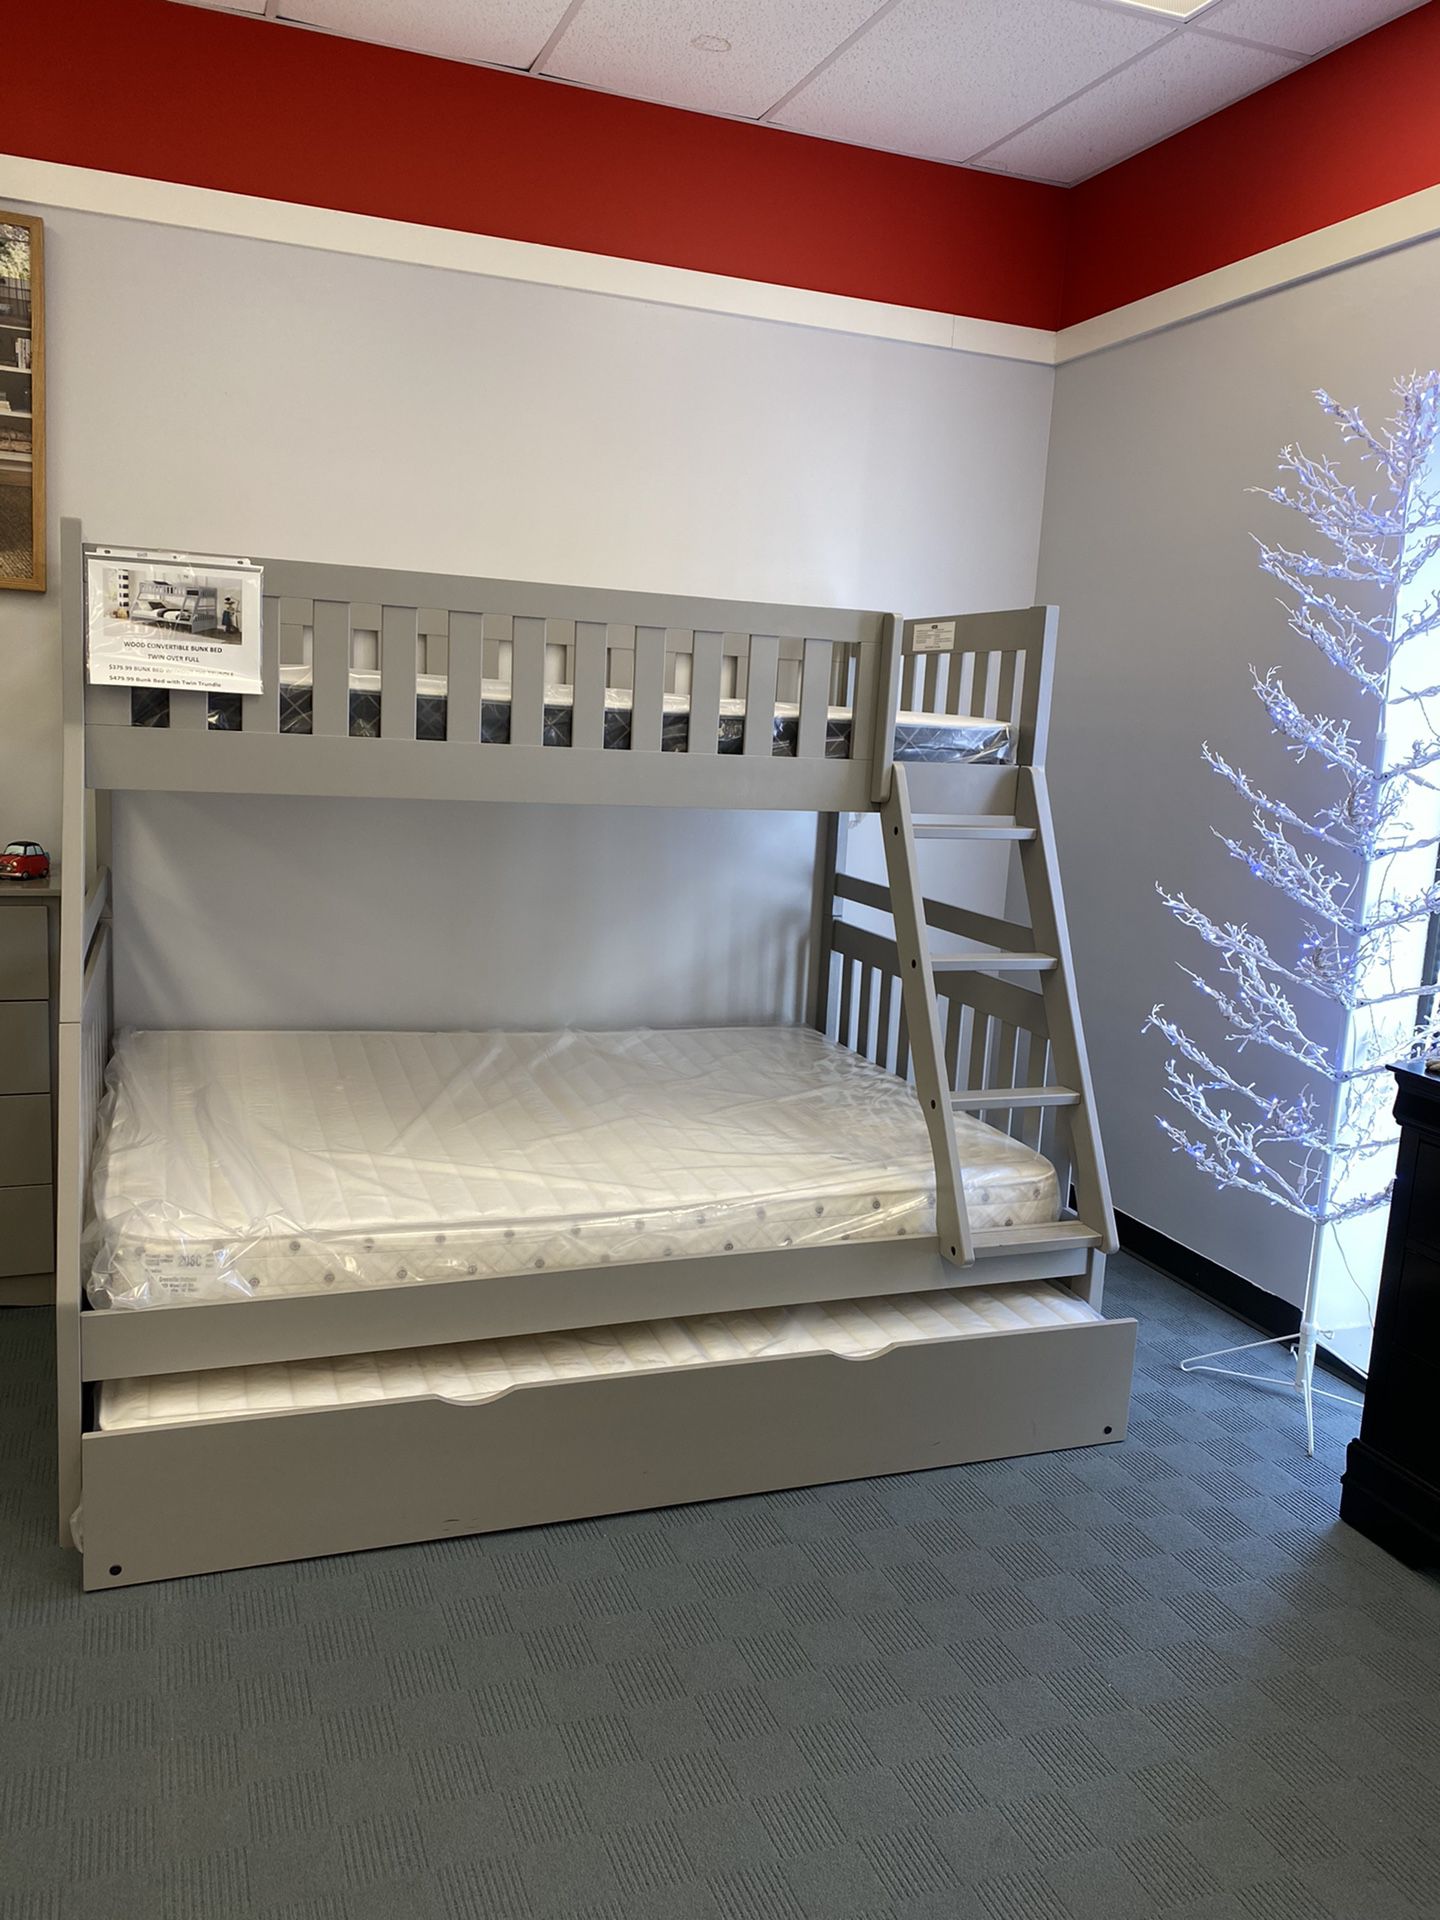 Huge Bunkbed sale - Trundle and Mattress is Available separately